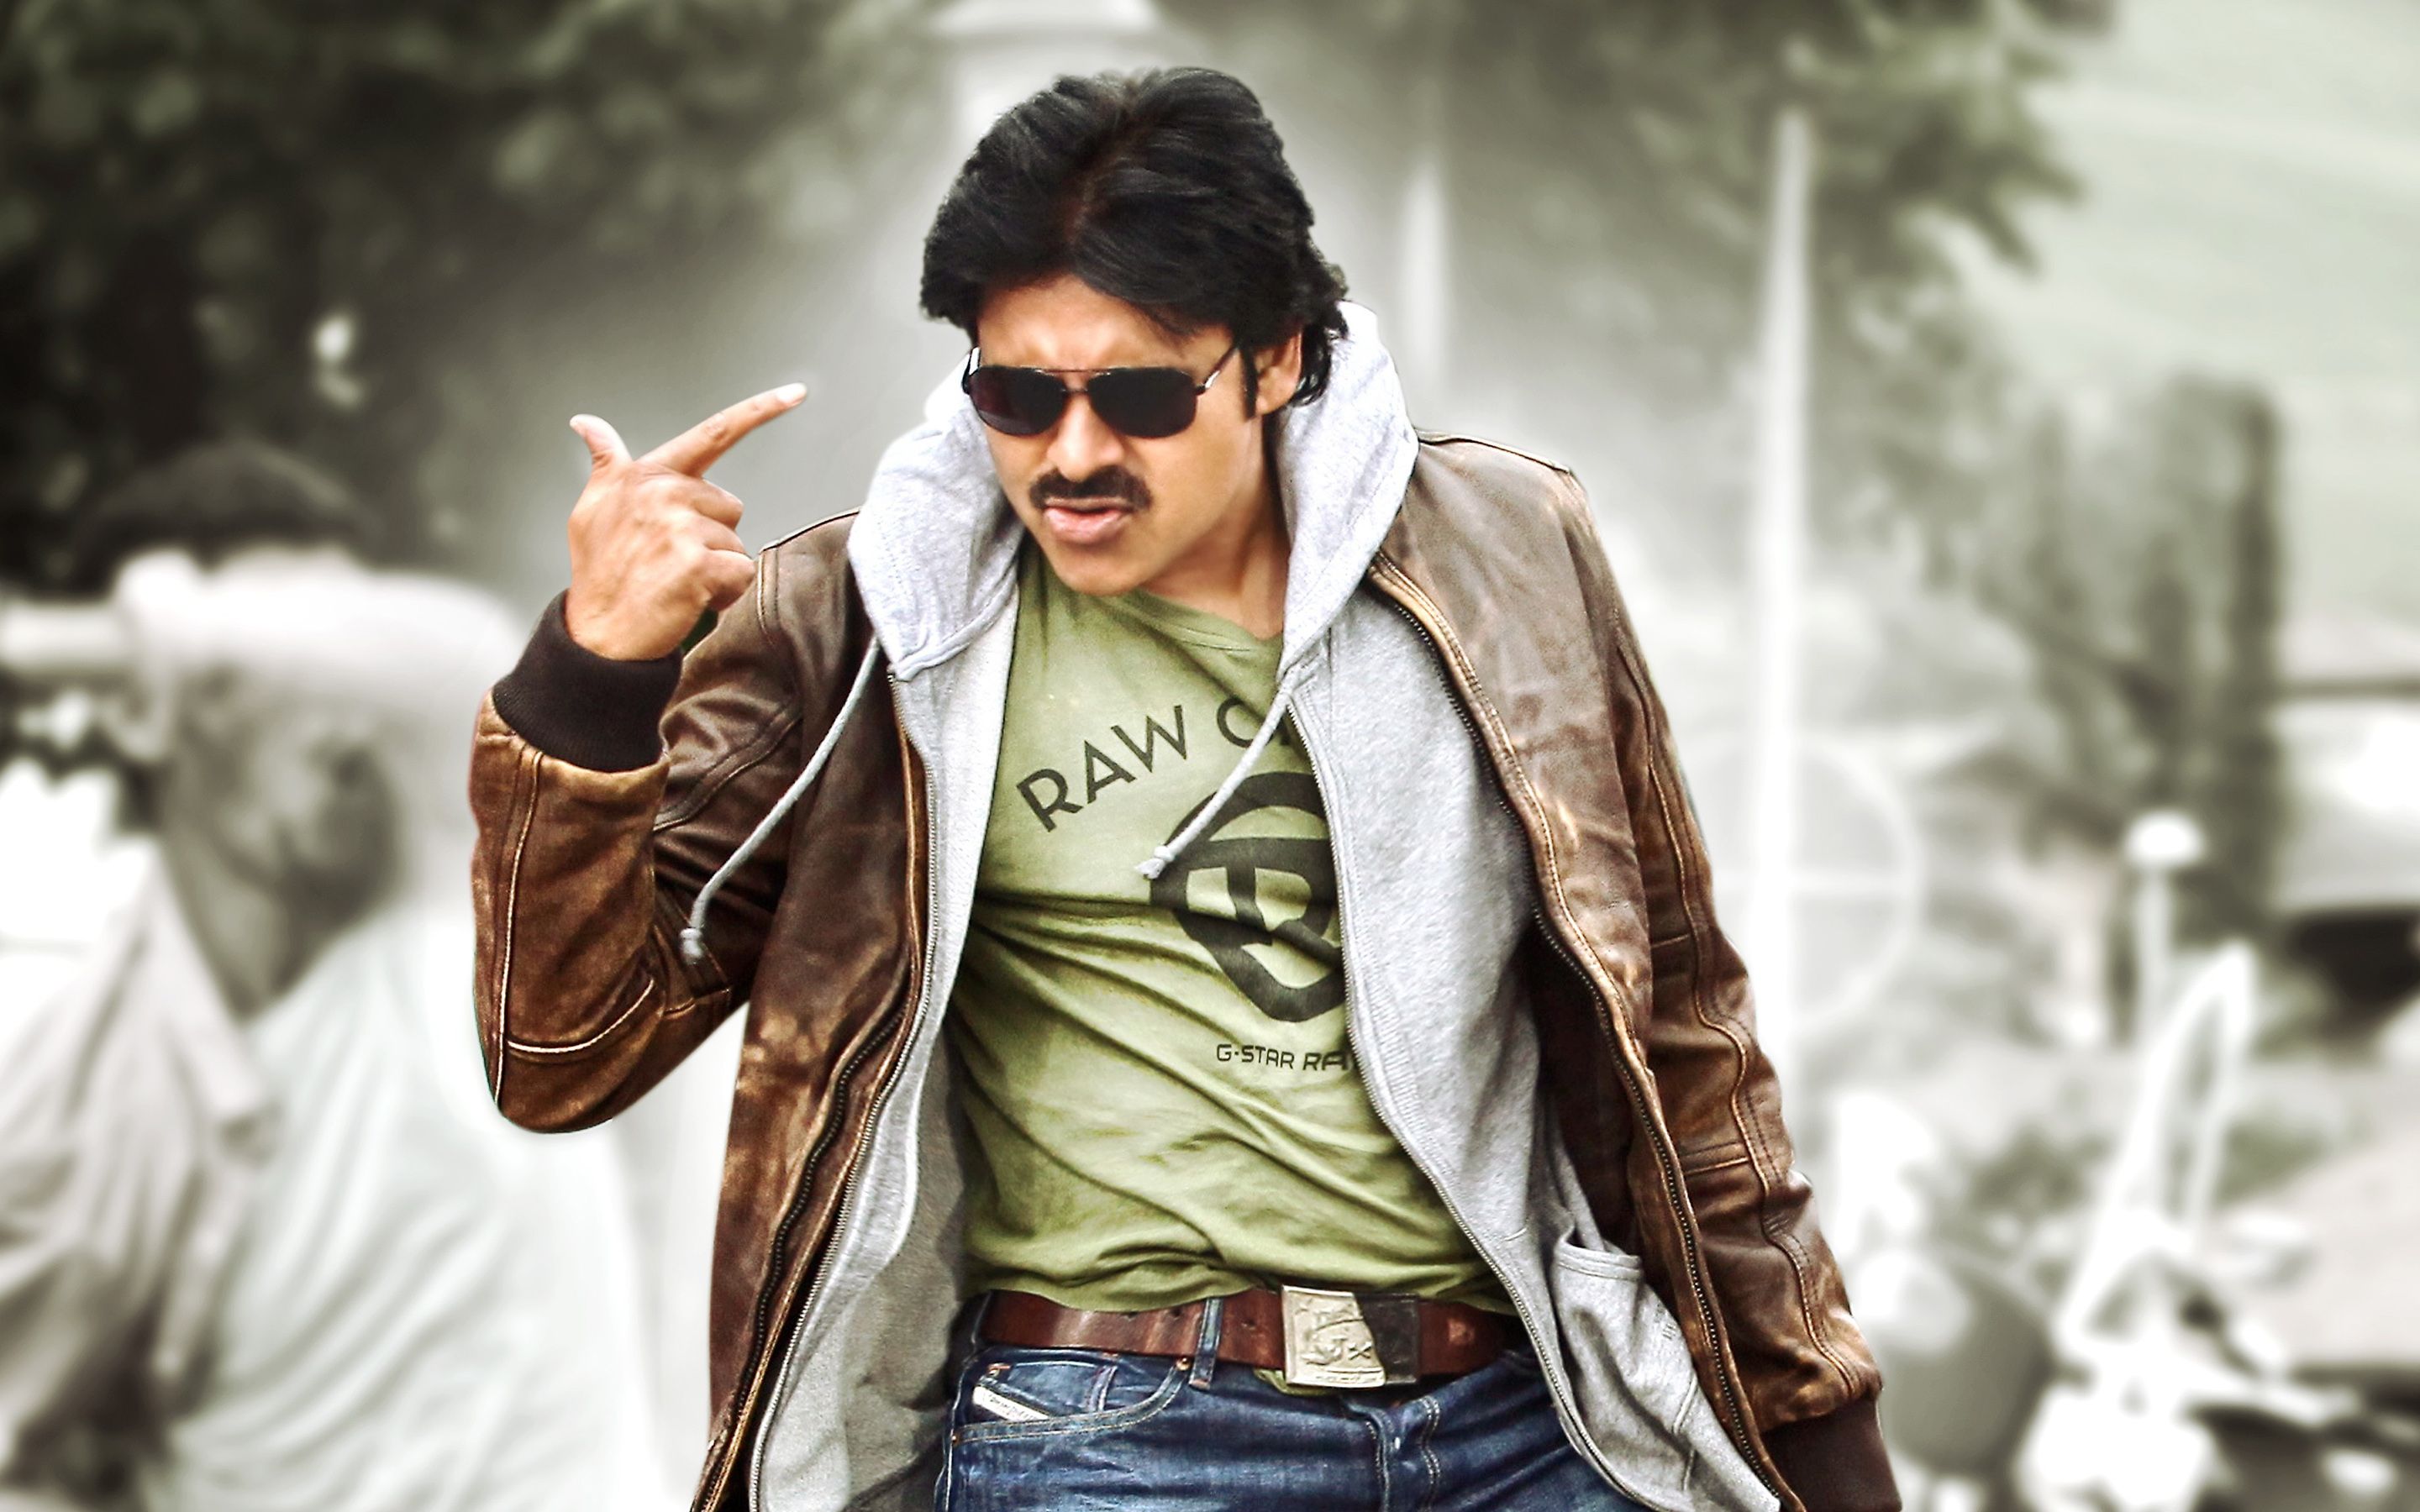 Pawan 4K wallpaper for your desktop or mobile screen free and easy to download